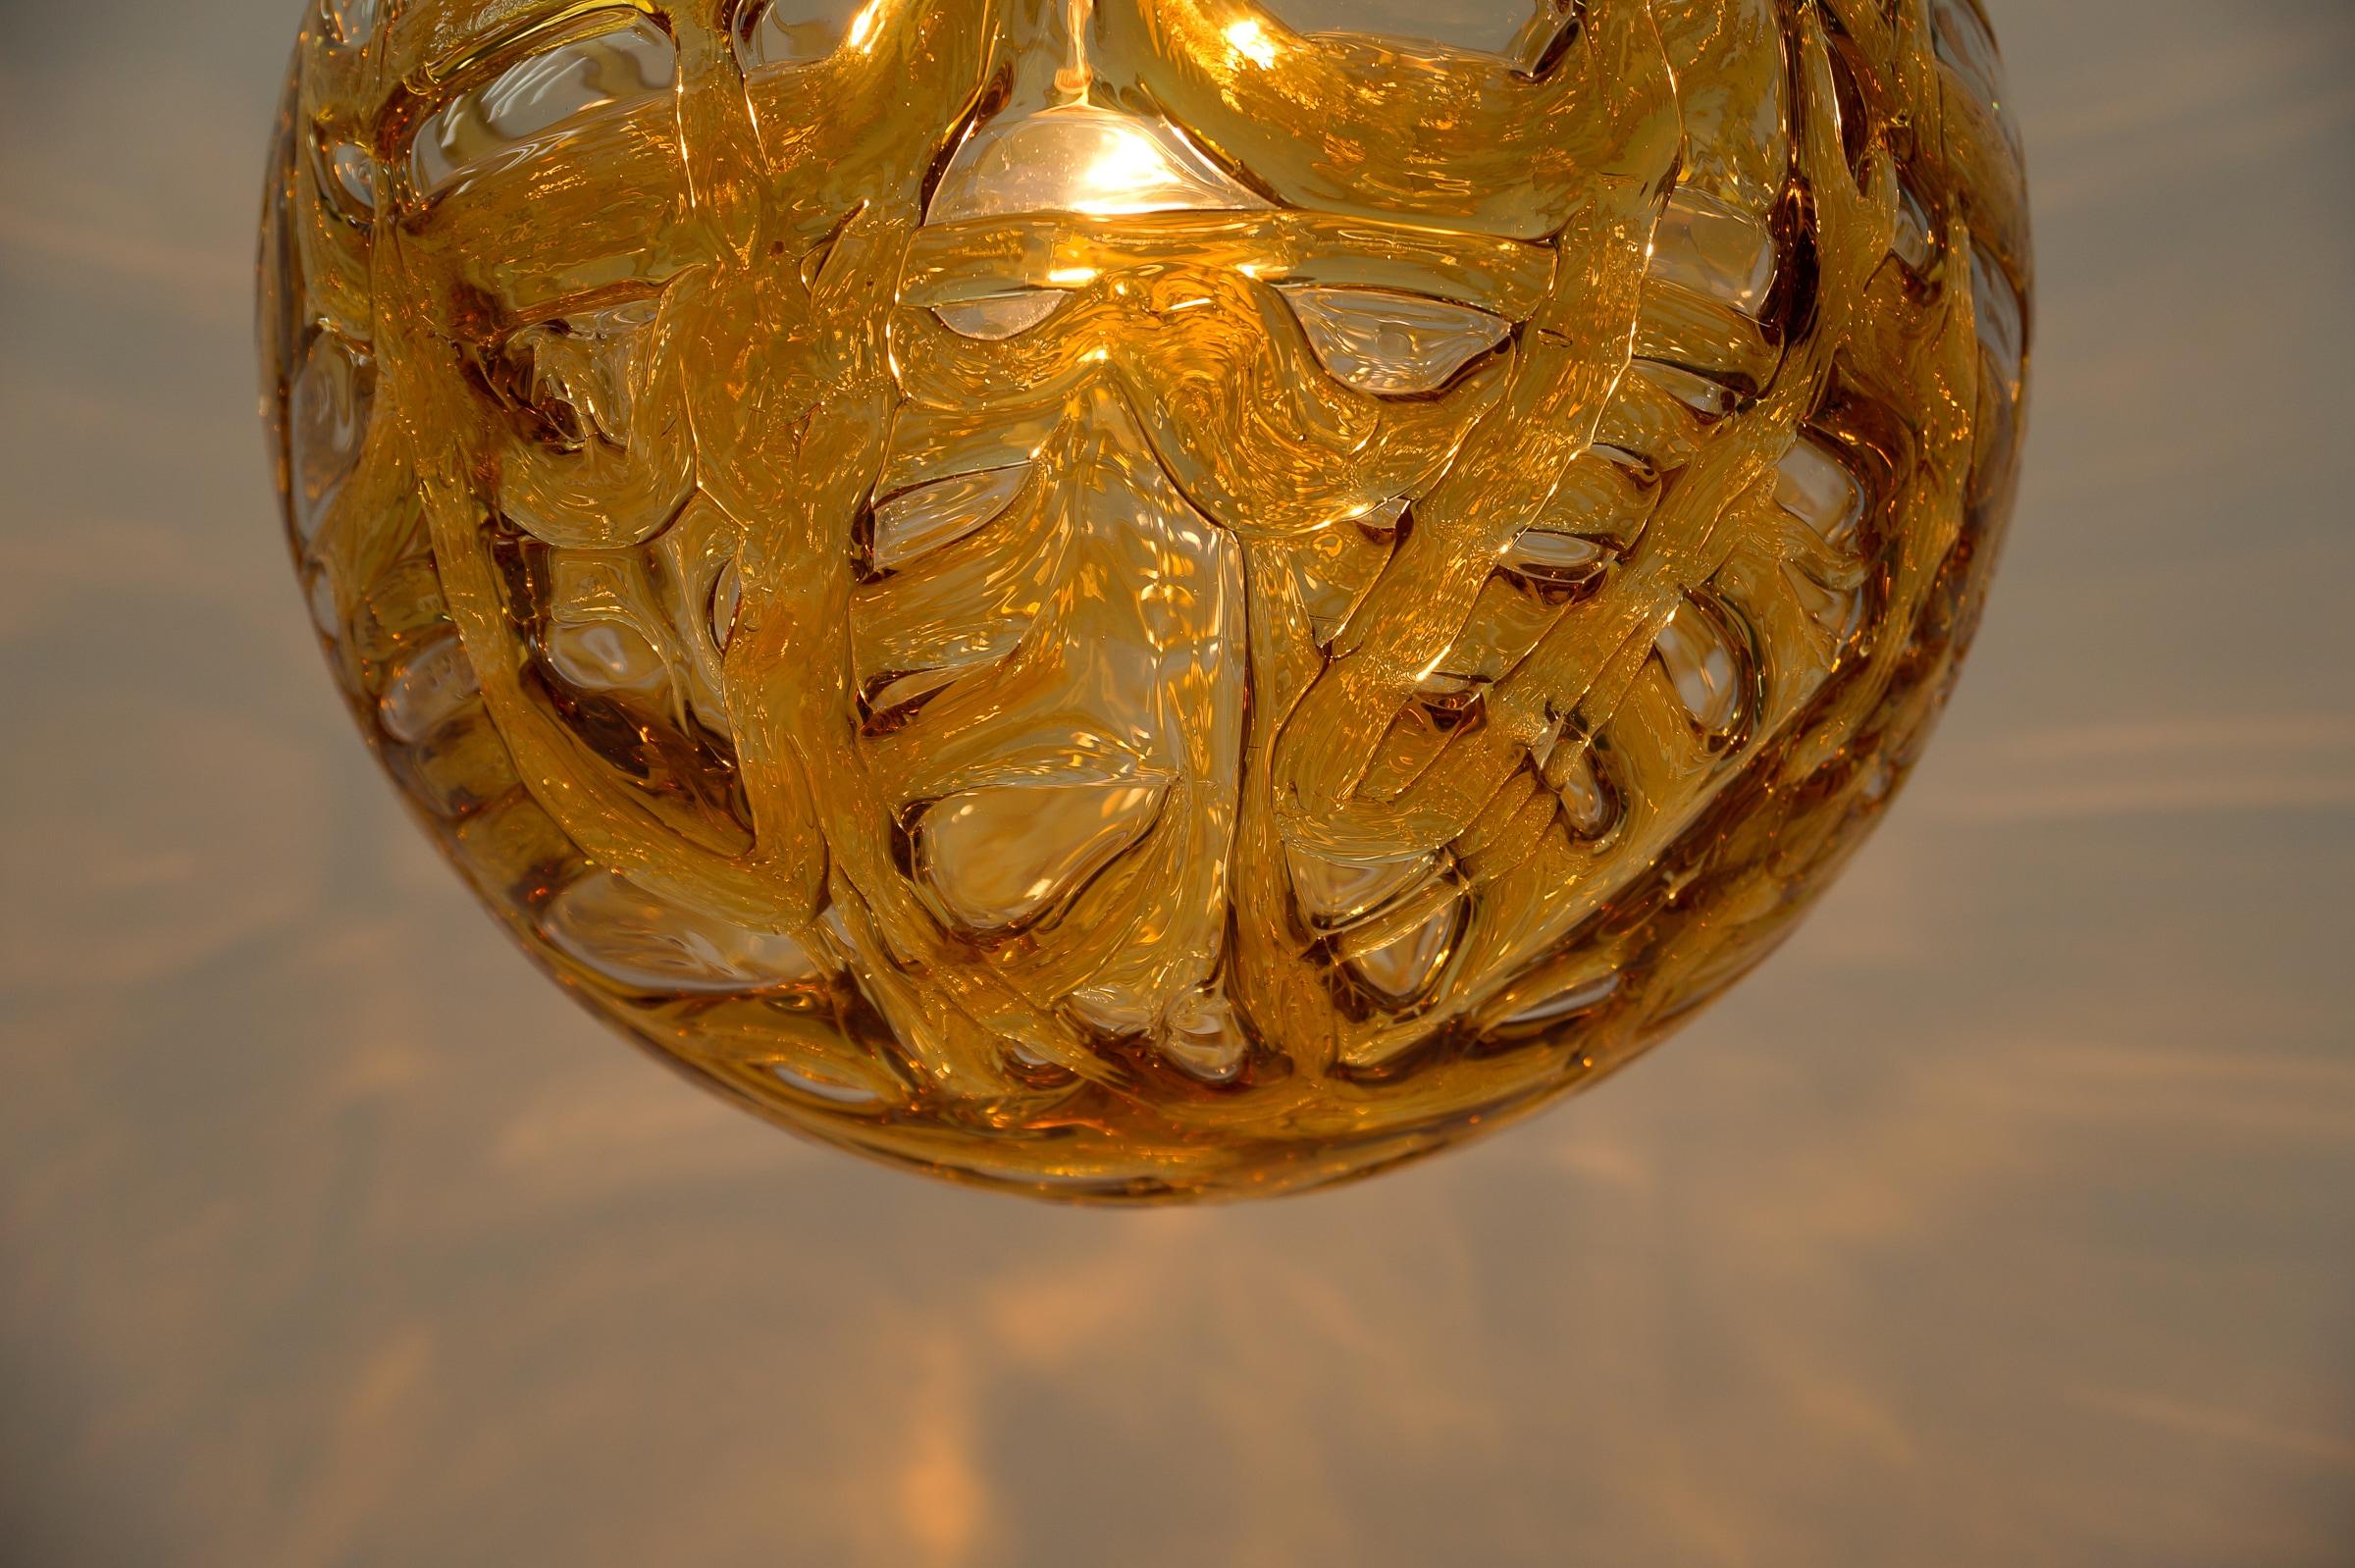 Yellow Murano Glass Ball Pendant Lamp by Doria, - 1960s Germany For Sale 3